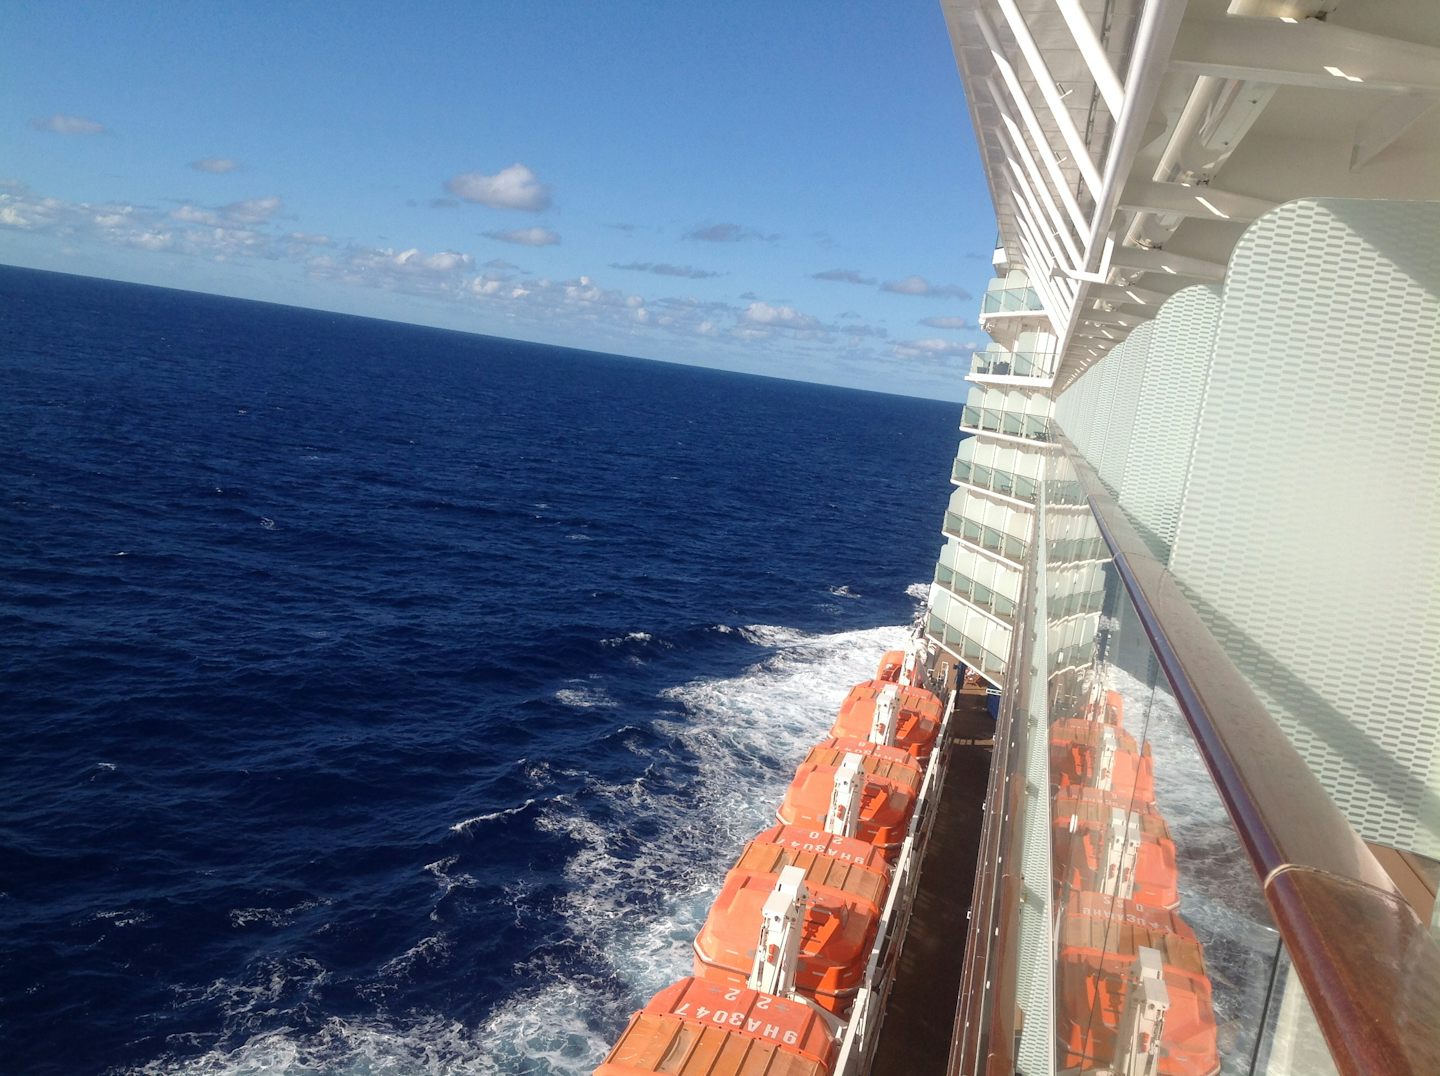 Sunny day out at sea